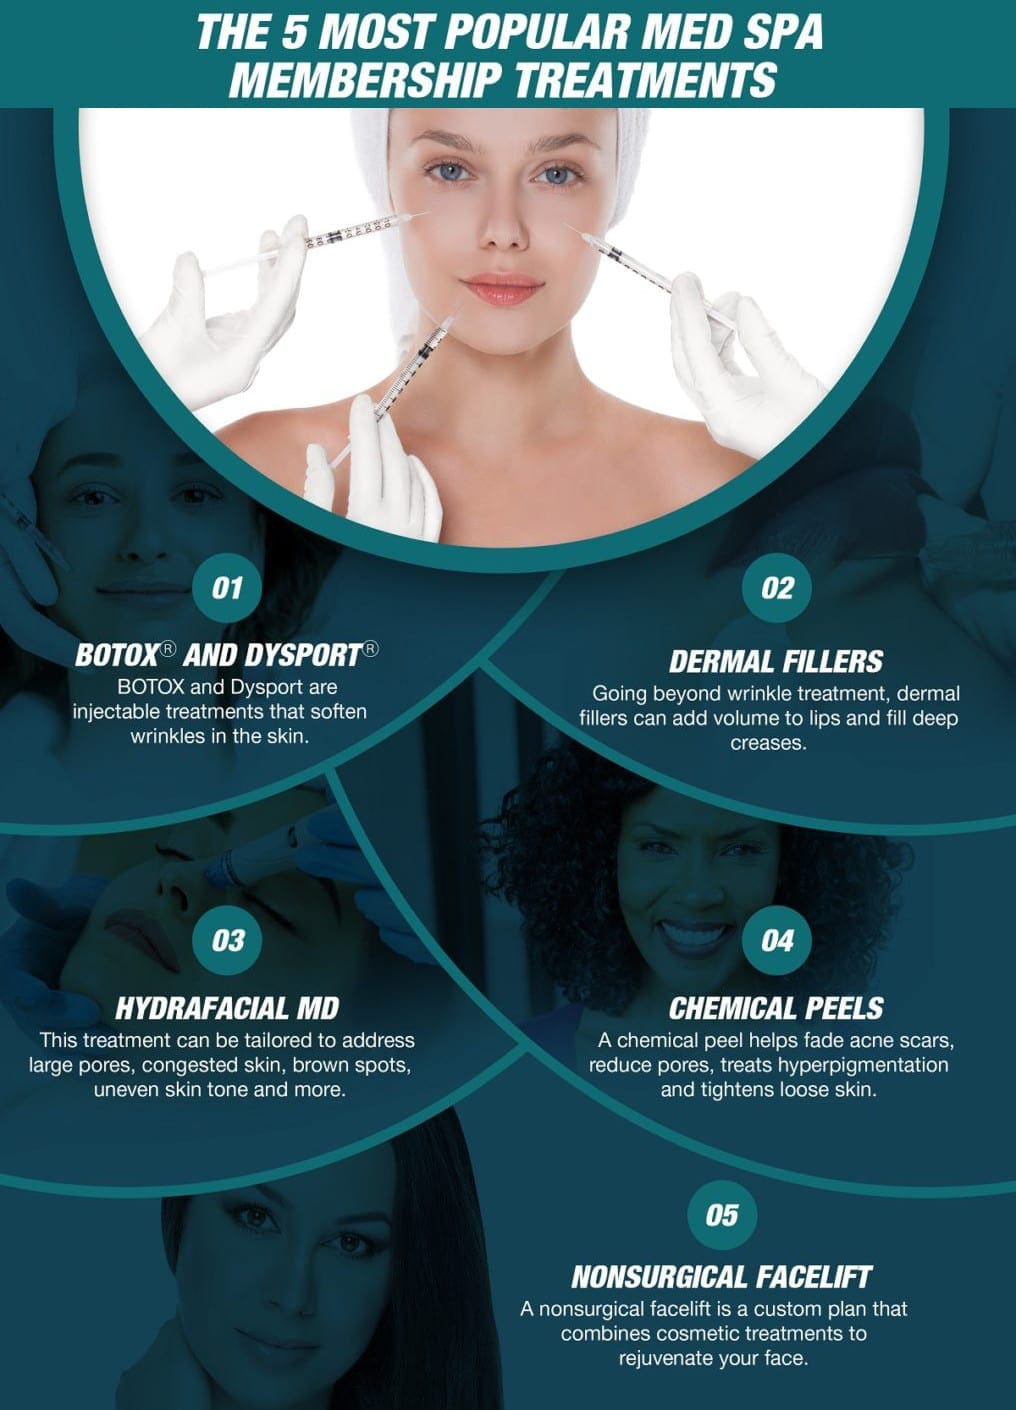 The 5 Most Popular Med Spa Membership Treatments Explained [Infographic] img 1